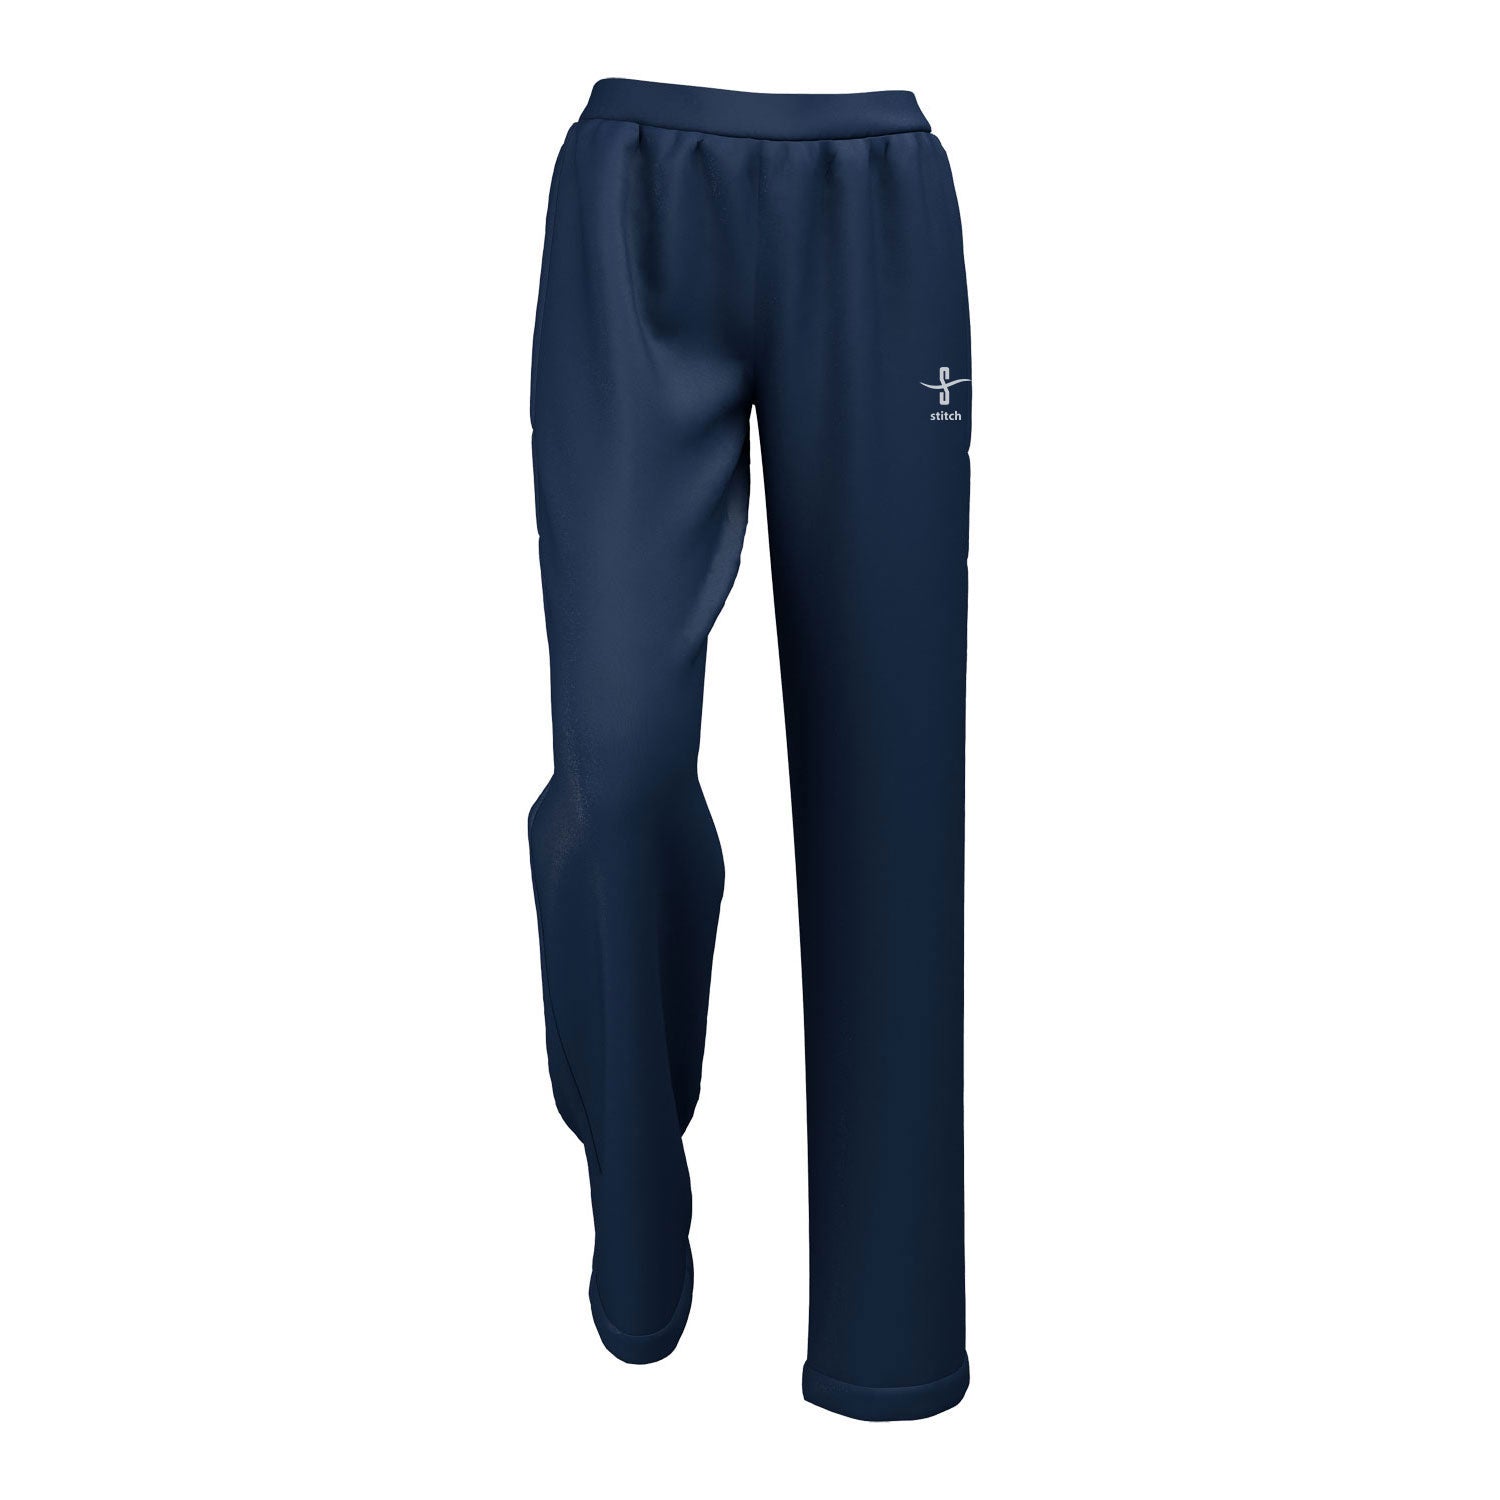 Scullers For Her Kids Trousers - Buy Scullers For Her Kids Trousers online  in India